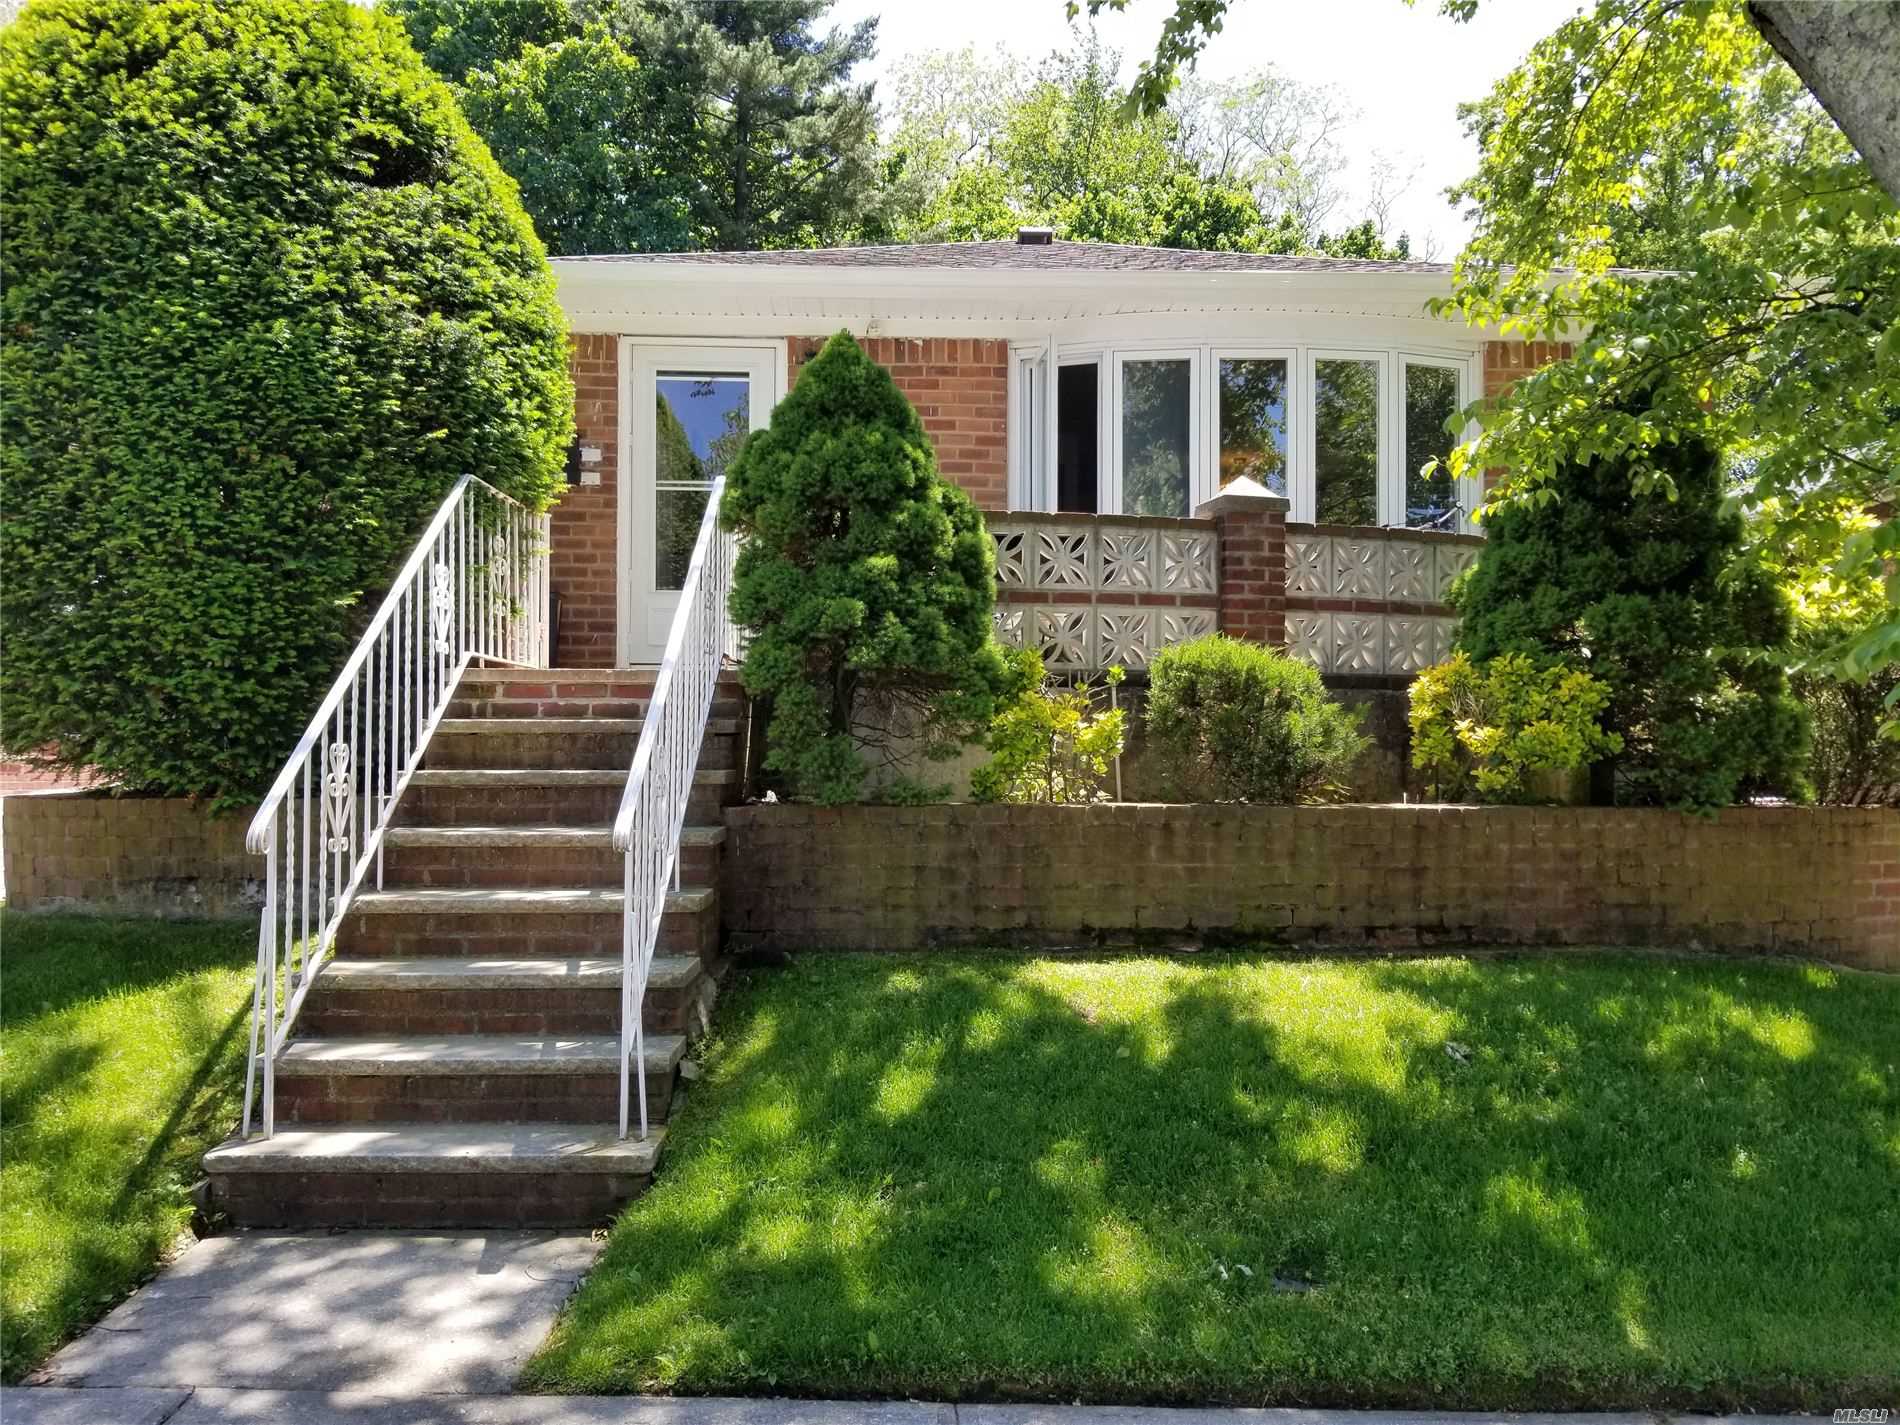 very desirable Oakland gardens, whole brick ranch, best school district #26, P.S. 188, I.S.74, recently changed roof, very quiet & convenient block, nice view from the private front porch, full finished newly tiled floor basement with separate entrance has office & playroom, , bus to Flushing Q27, to NYC QM5, Q88, near to beautiful Alley pond park,